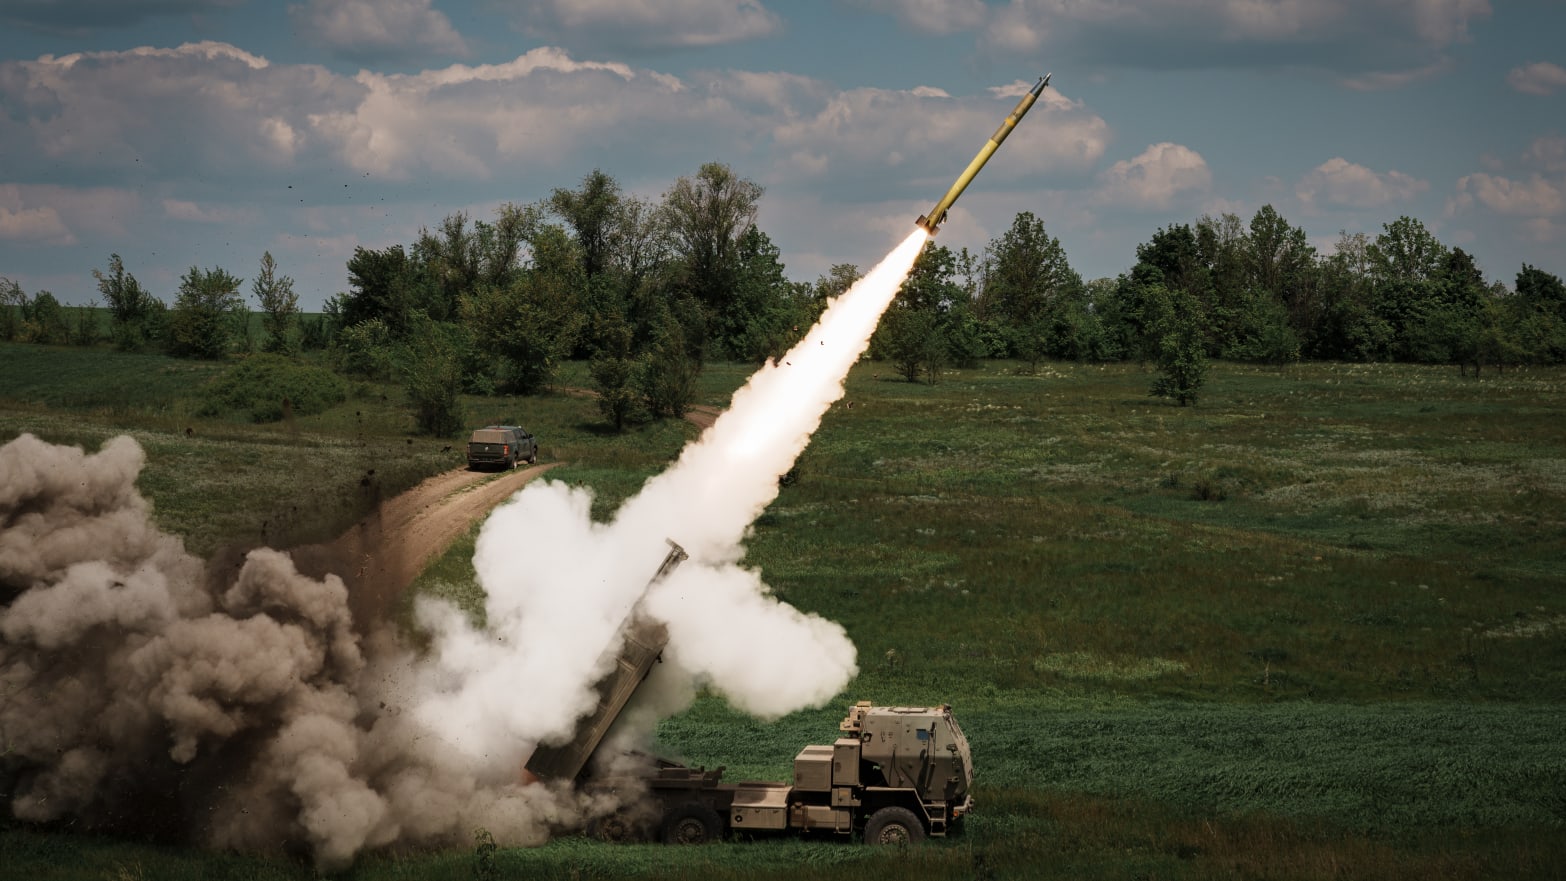 Members of several companies of the 36th Guards Motor Rifle Brigade were said to have been hit in the HIMARS strike.